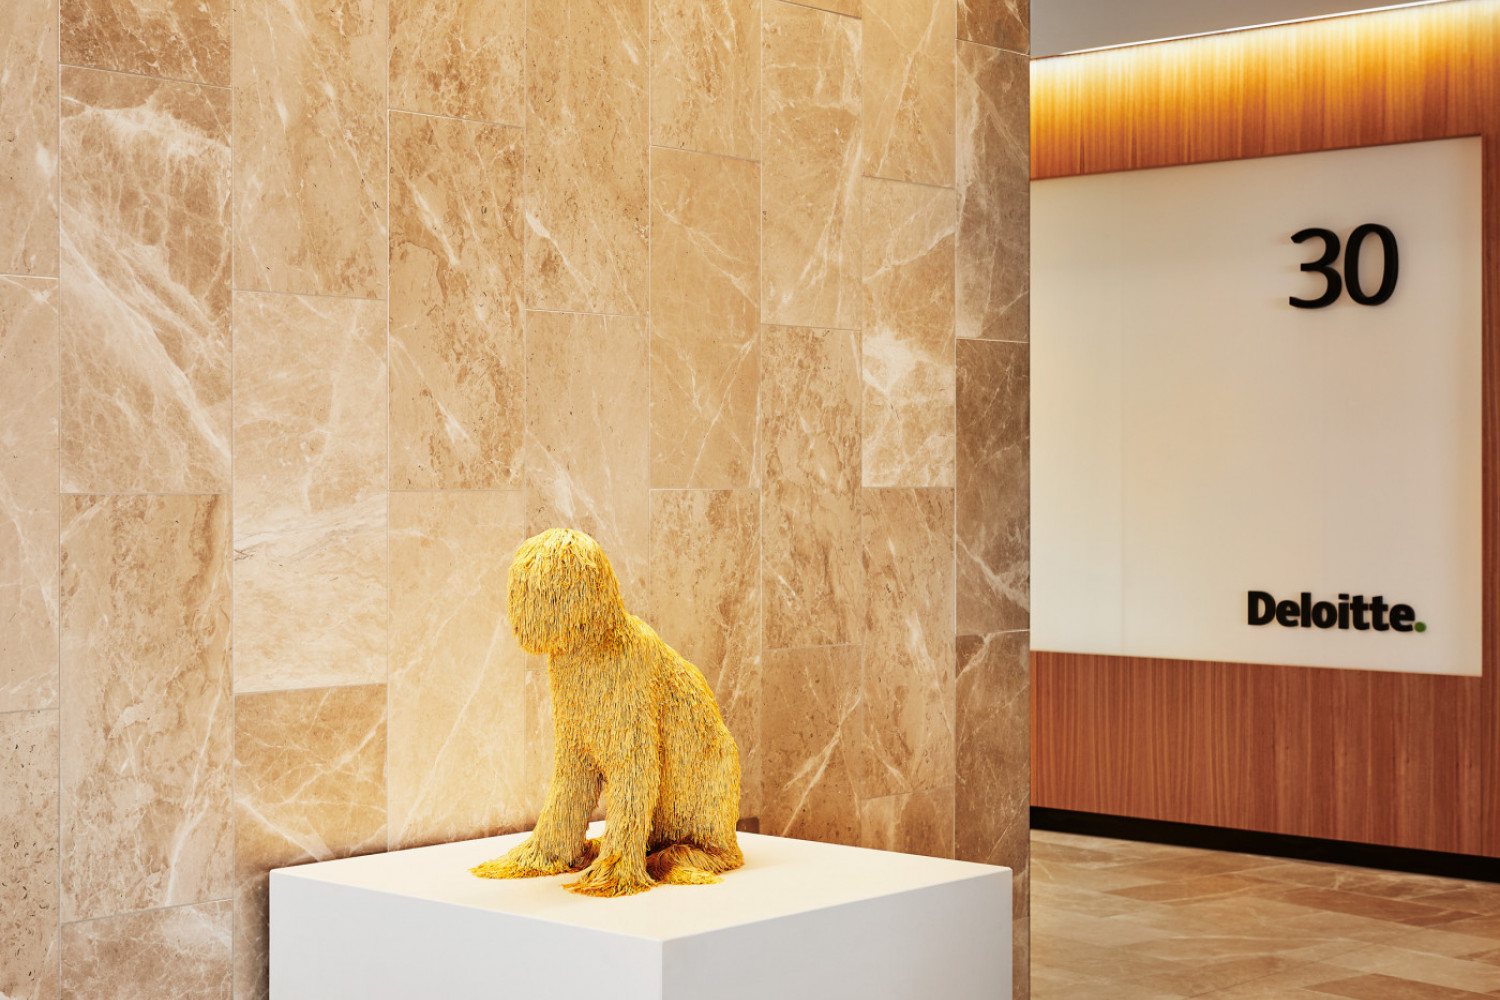  Golden Animal, Troy Emery. Installed at Deloitte, Melbourne. Photography: Rochelle Eagle